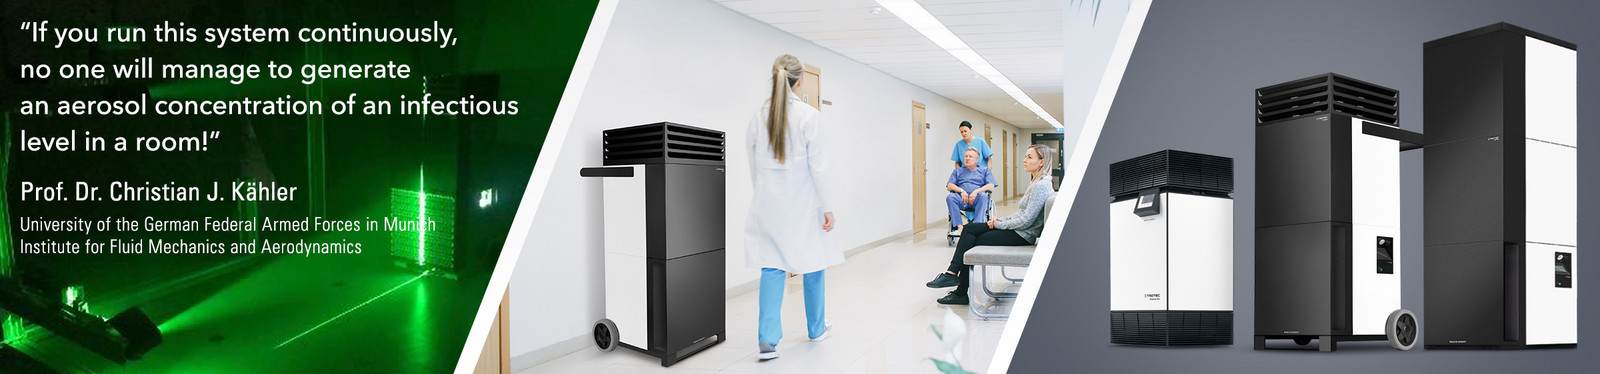 Trotec high-performance air purifiers create bacteria and virus-free room air in waiting rooms and medical practices – with scientifically proven effectiveness!